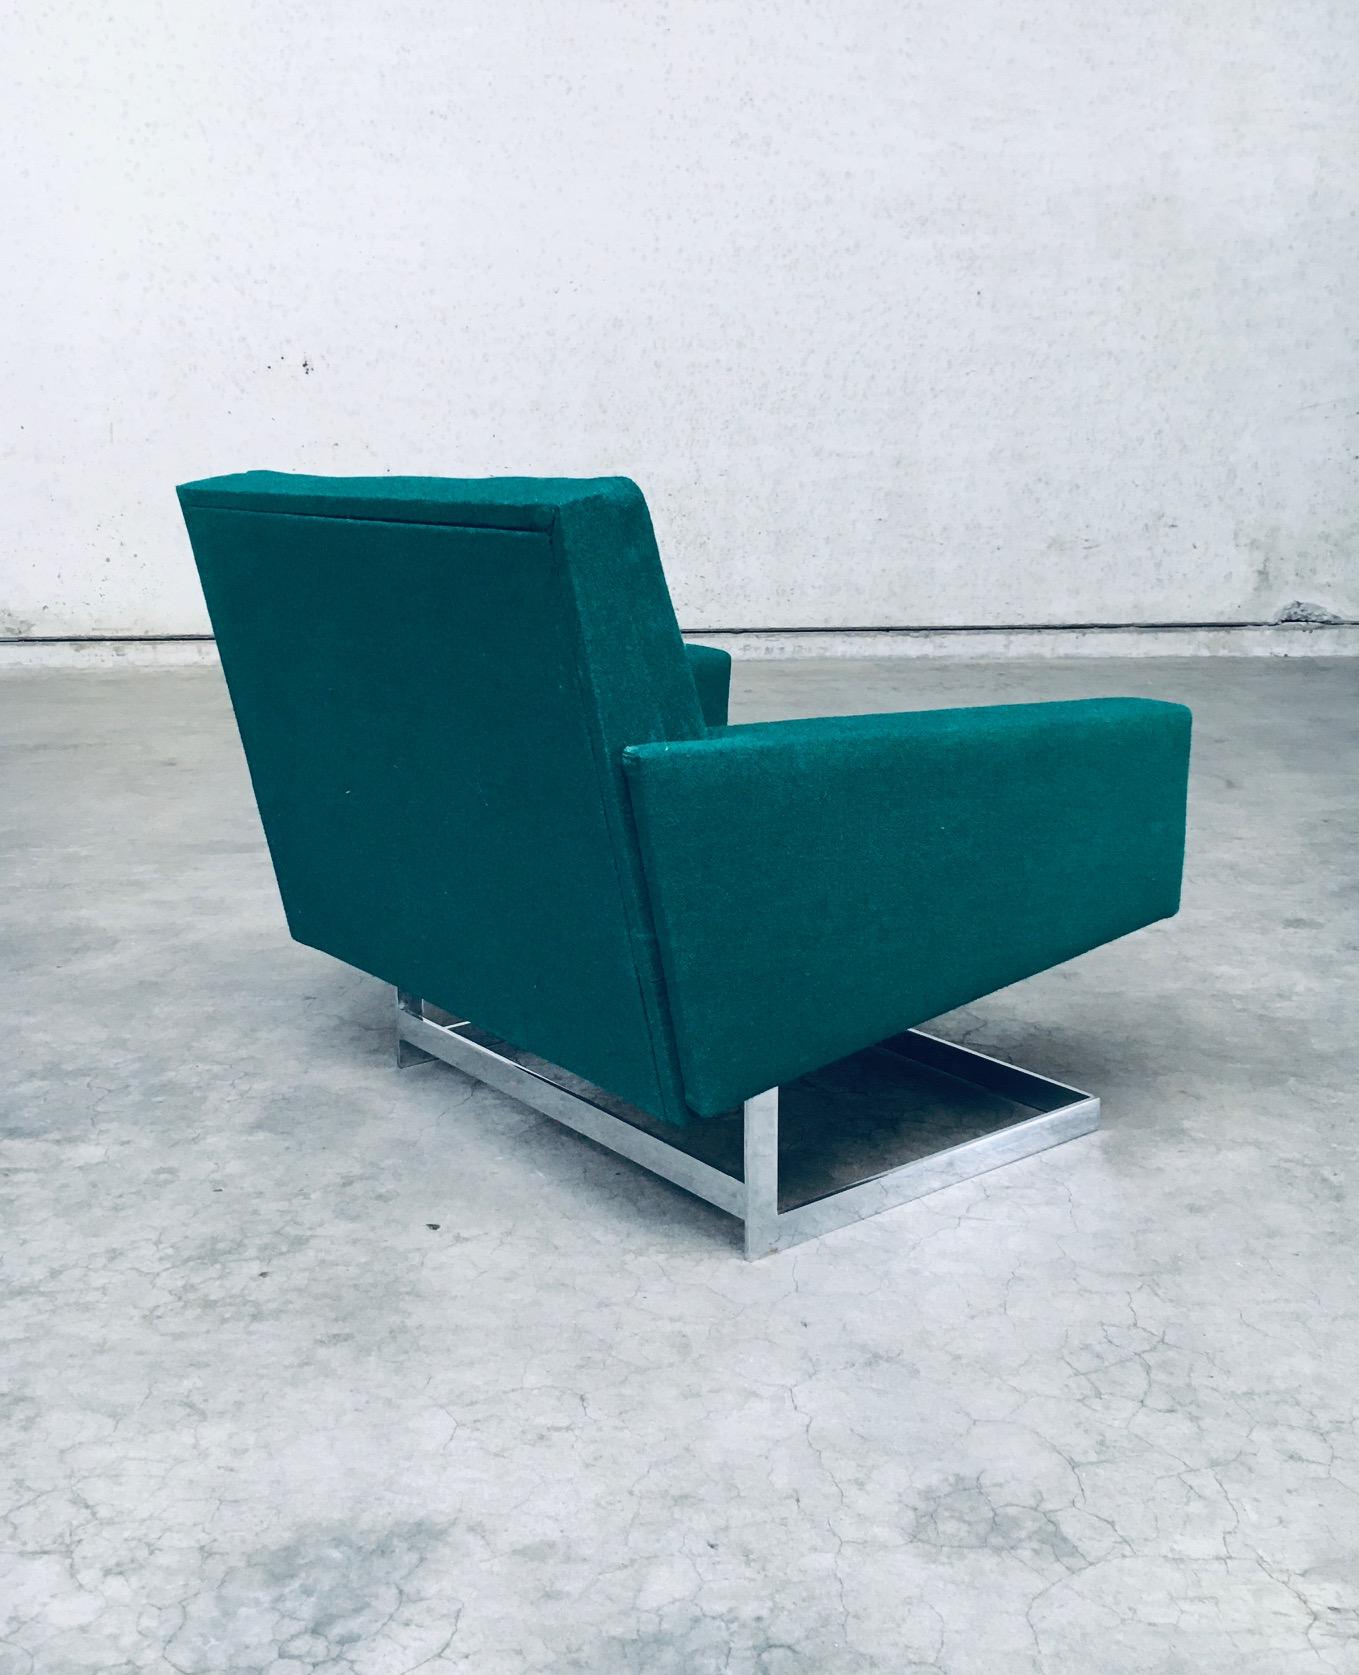 1960's Midcentury Modern Belgian Design Floating Lounge Chair For Sale 1